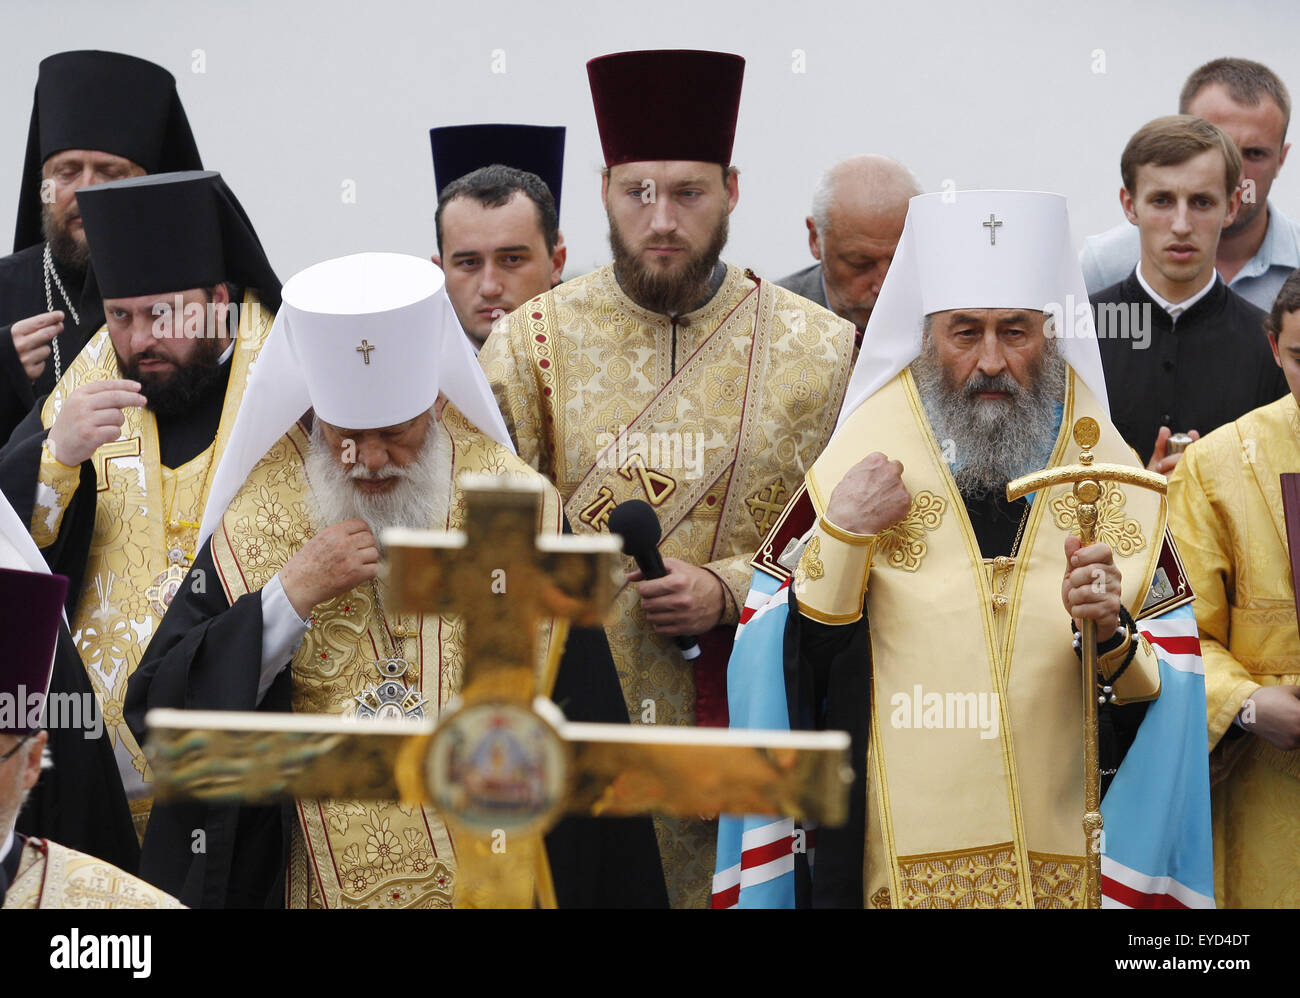 July 27, 2015 - Kiev, Ukraine - Metropolitan Onufry, head of the Ukrainian Orthodox Church of Moscow Patriarchate (2-R), participate in a prayer service marking the 1000th anniversary of the Repose of Vladimir the Great at St. Vladimirs Hill in Kiev, Ukraine, 27 July 2015. The Grand Prince of Kiev, Vladimir the Great, also known as St. Vladimir, Vladimir the Baptizer of Rus and Vladimir the Red Sun, was the first Christian ruler in the Kievan Rus who christianized the region. Orthodox believers will mark the 1027th anniversary of Kievan Rus Christianization on 28 July. (Credit Image: © Serg Gl Stock Photo